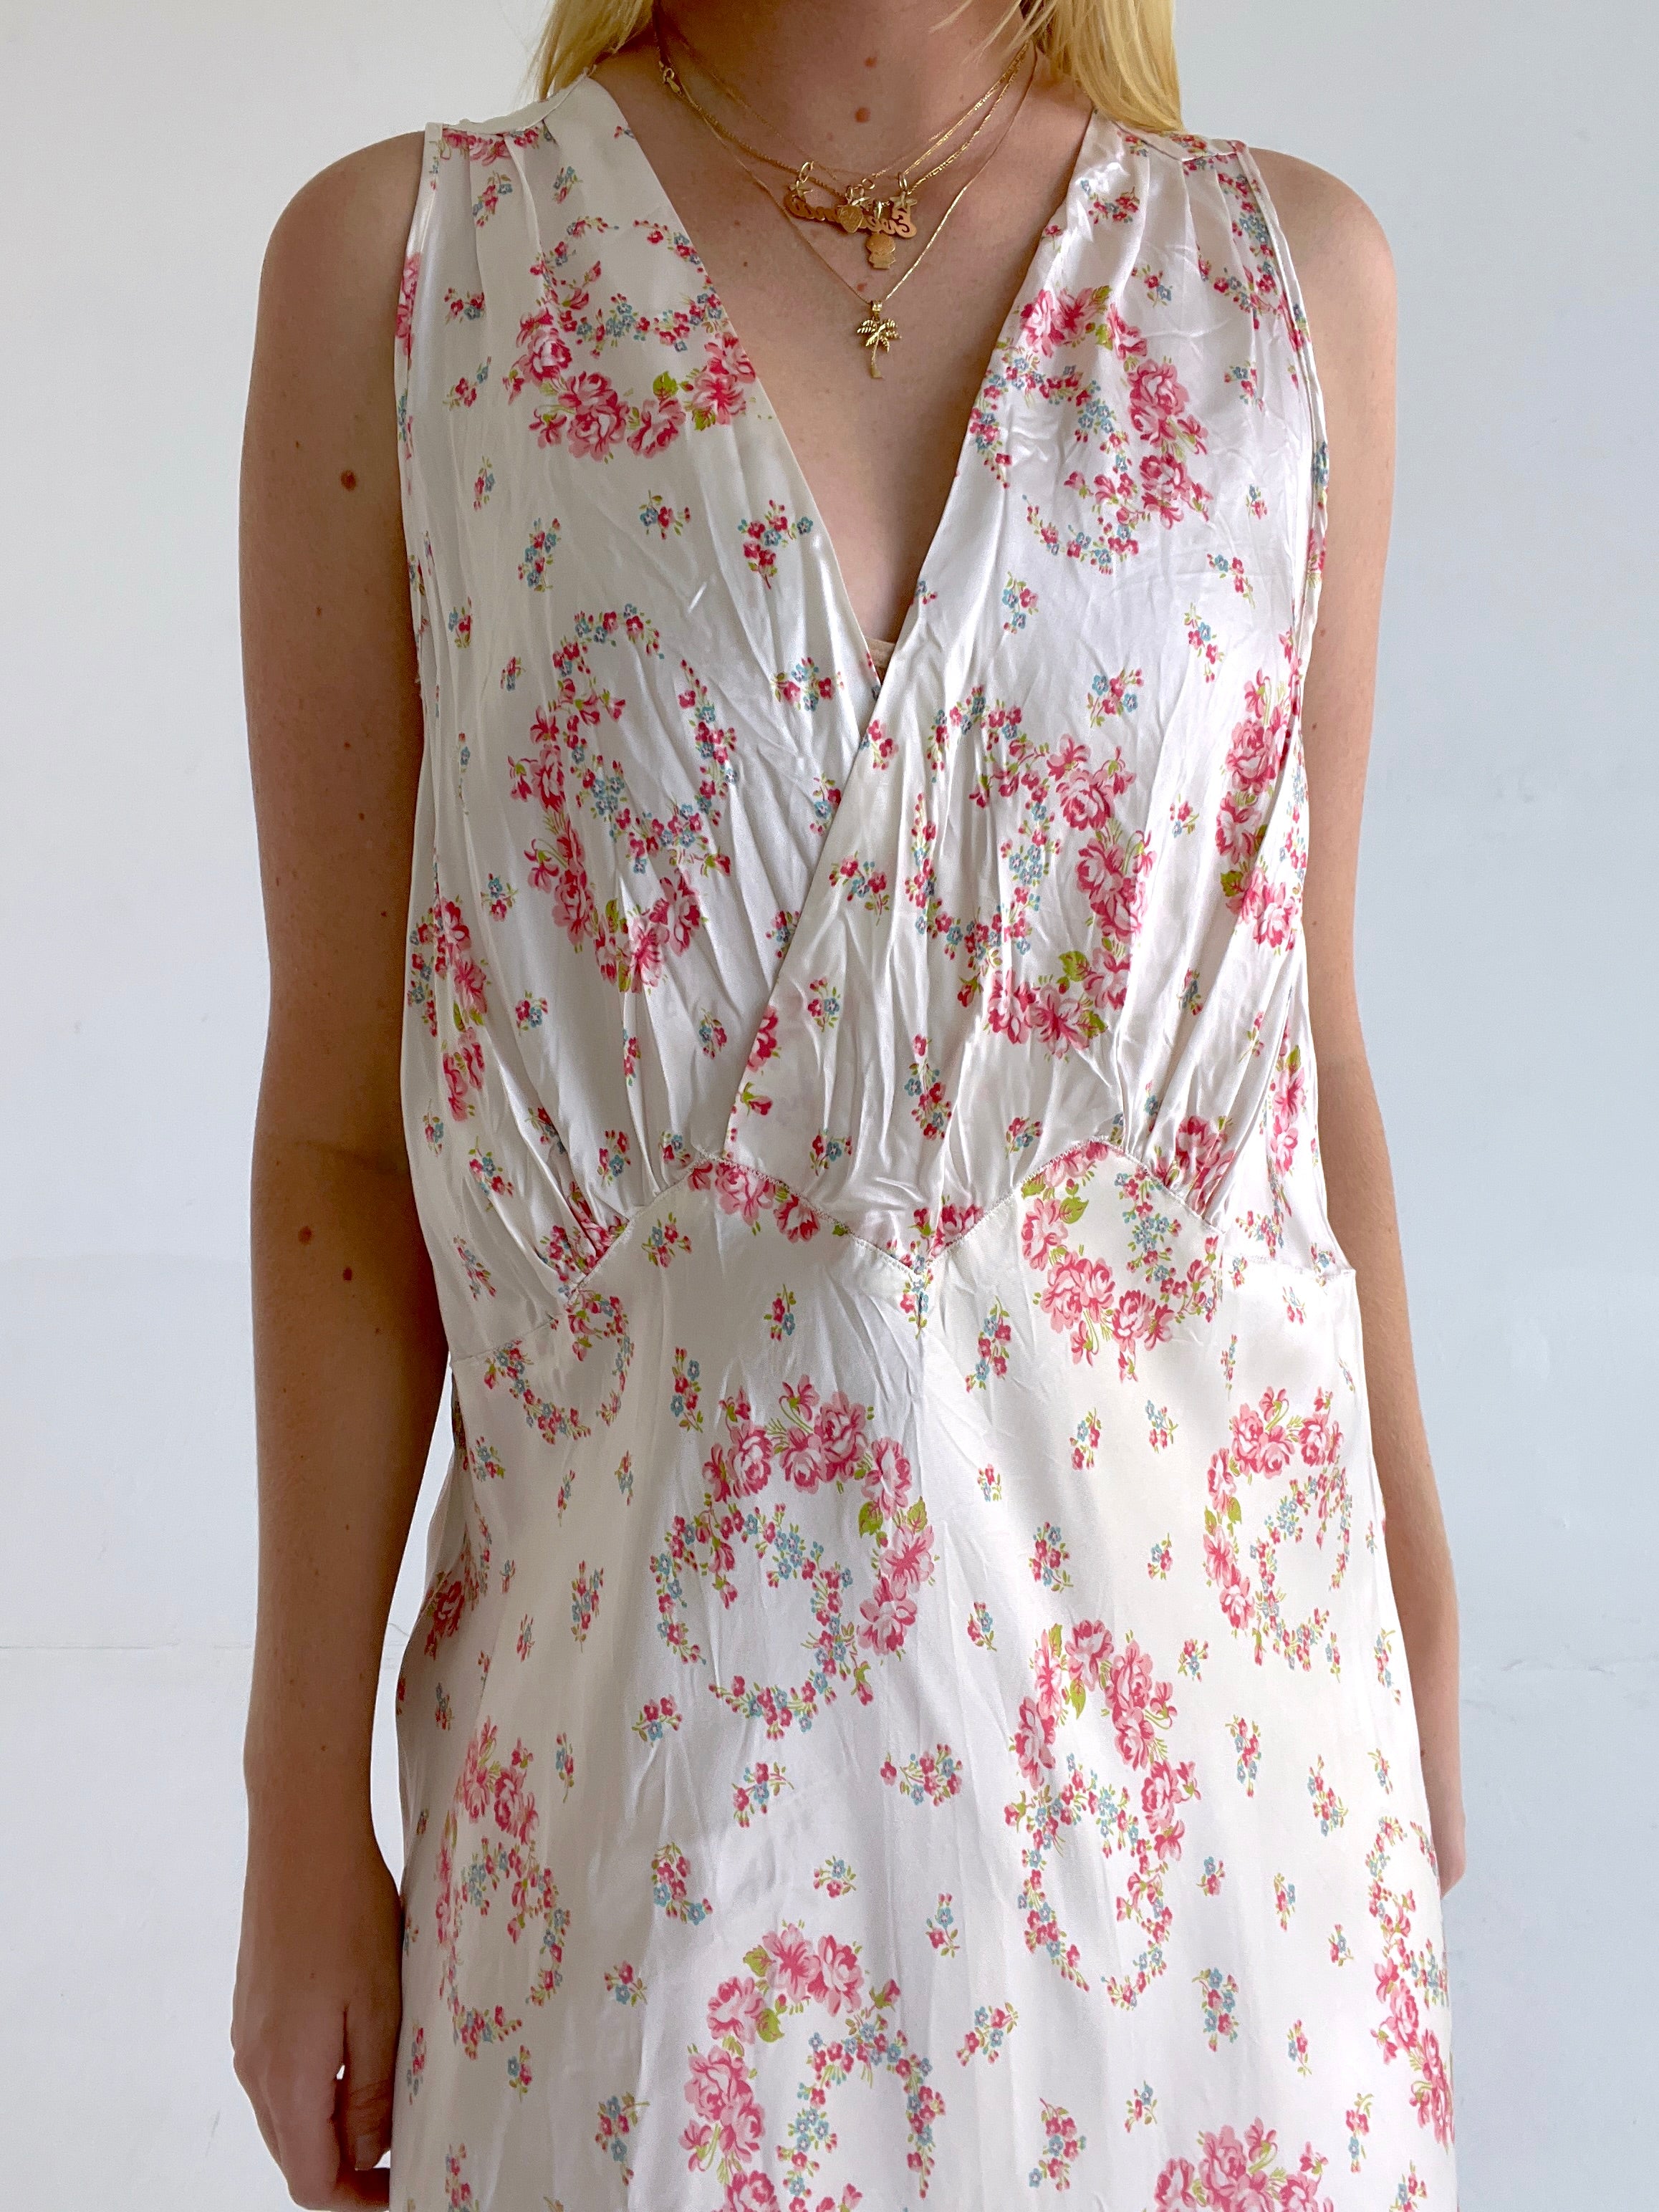 1930's White Slip with Pink Floral Wreath Print